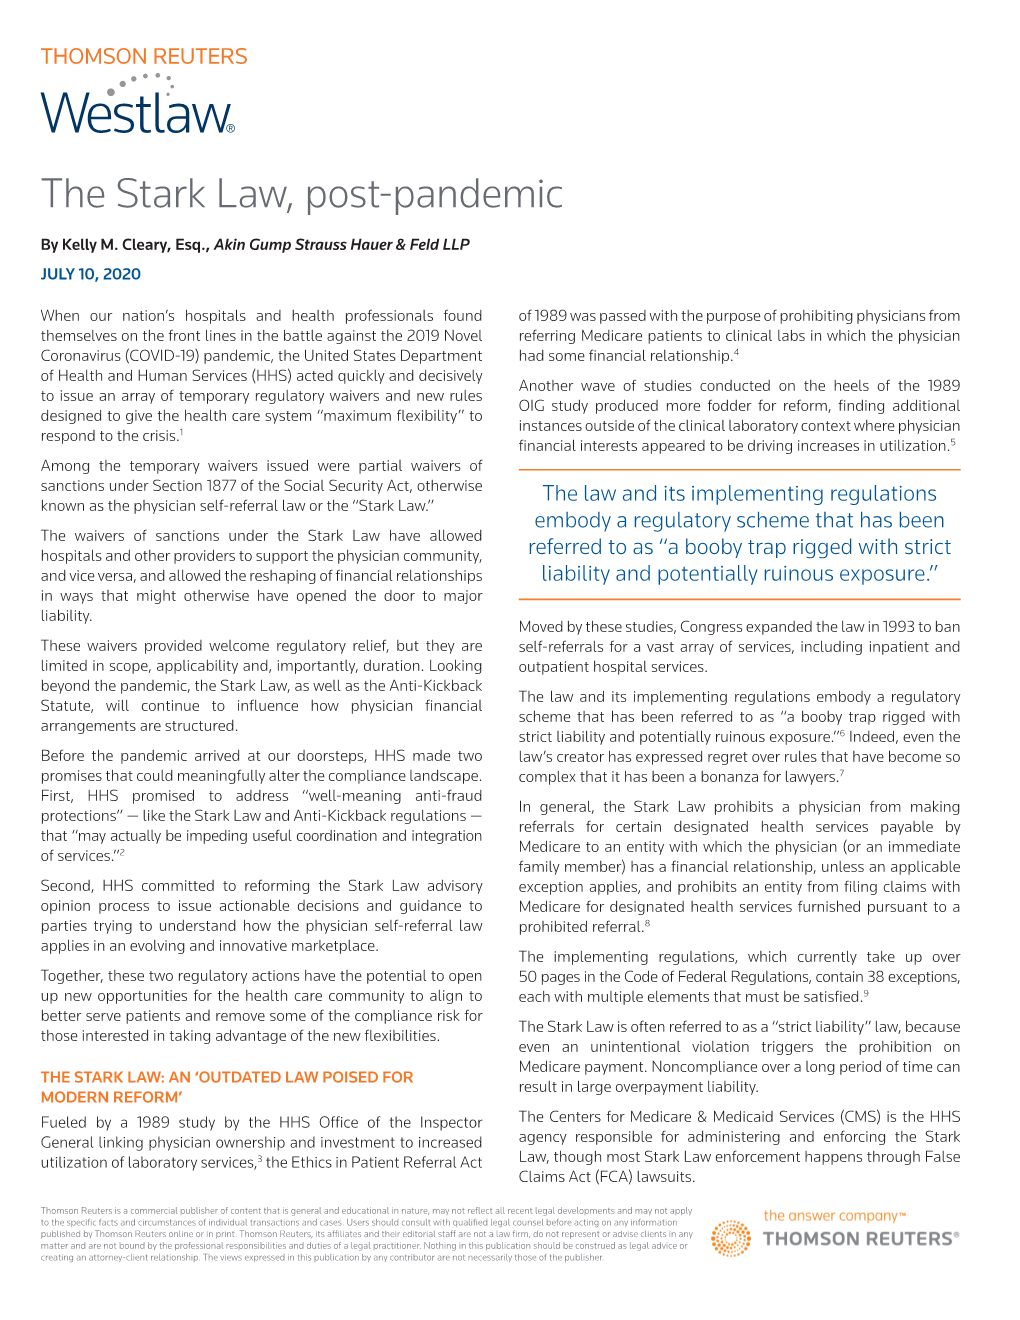 The Stark Law, Post-Pandemic